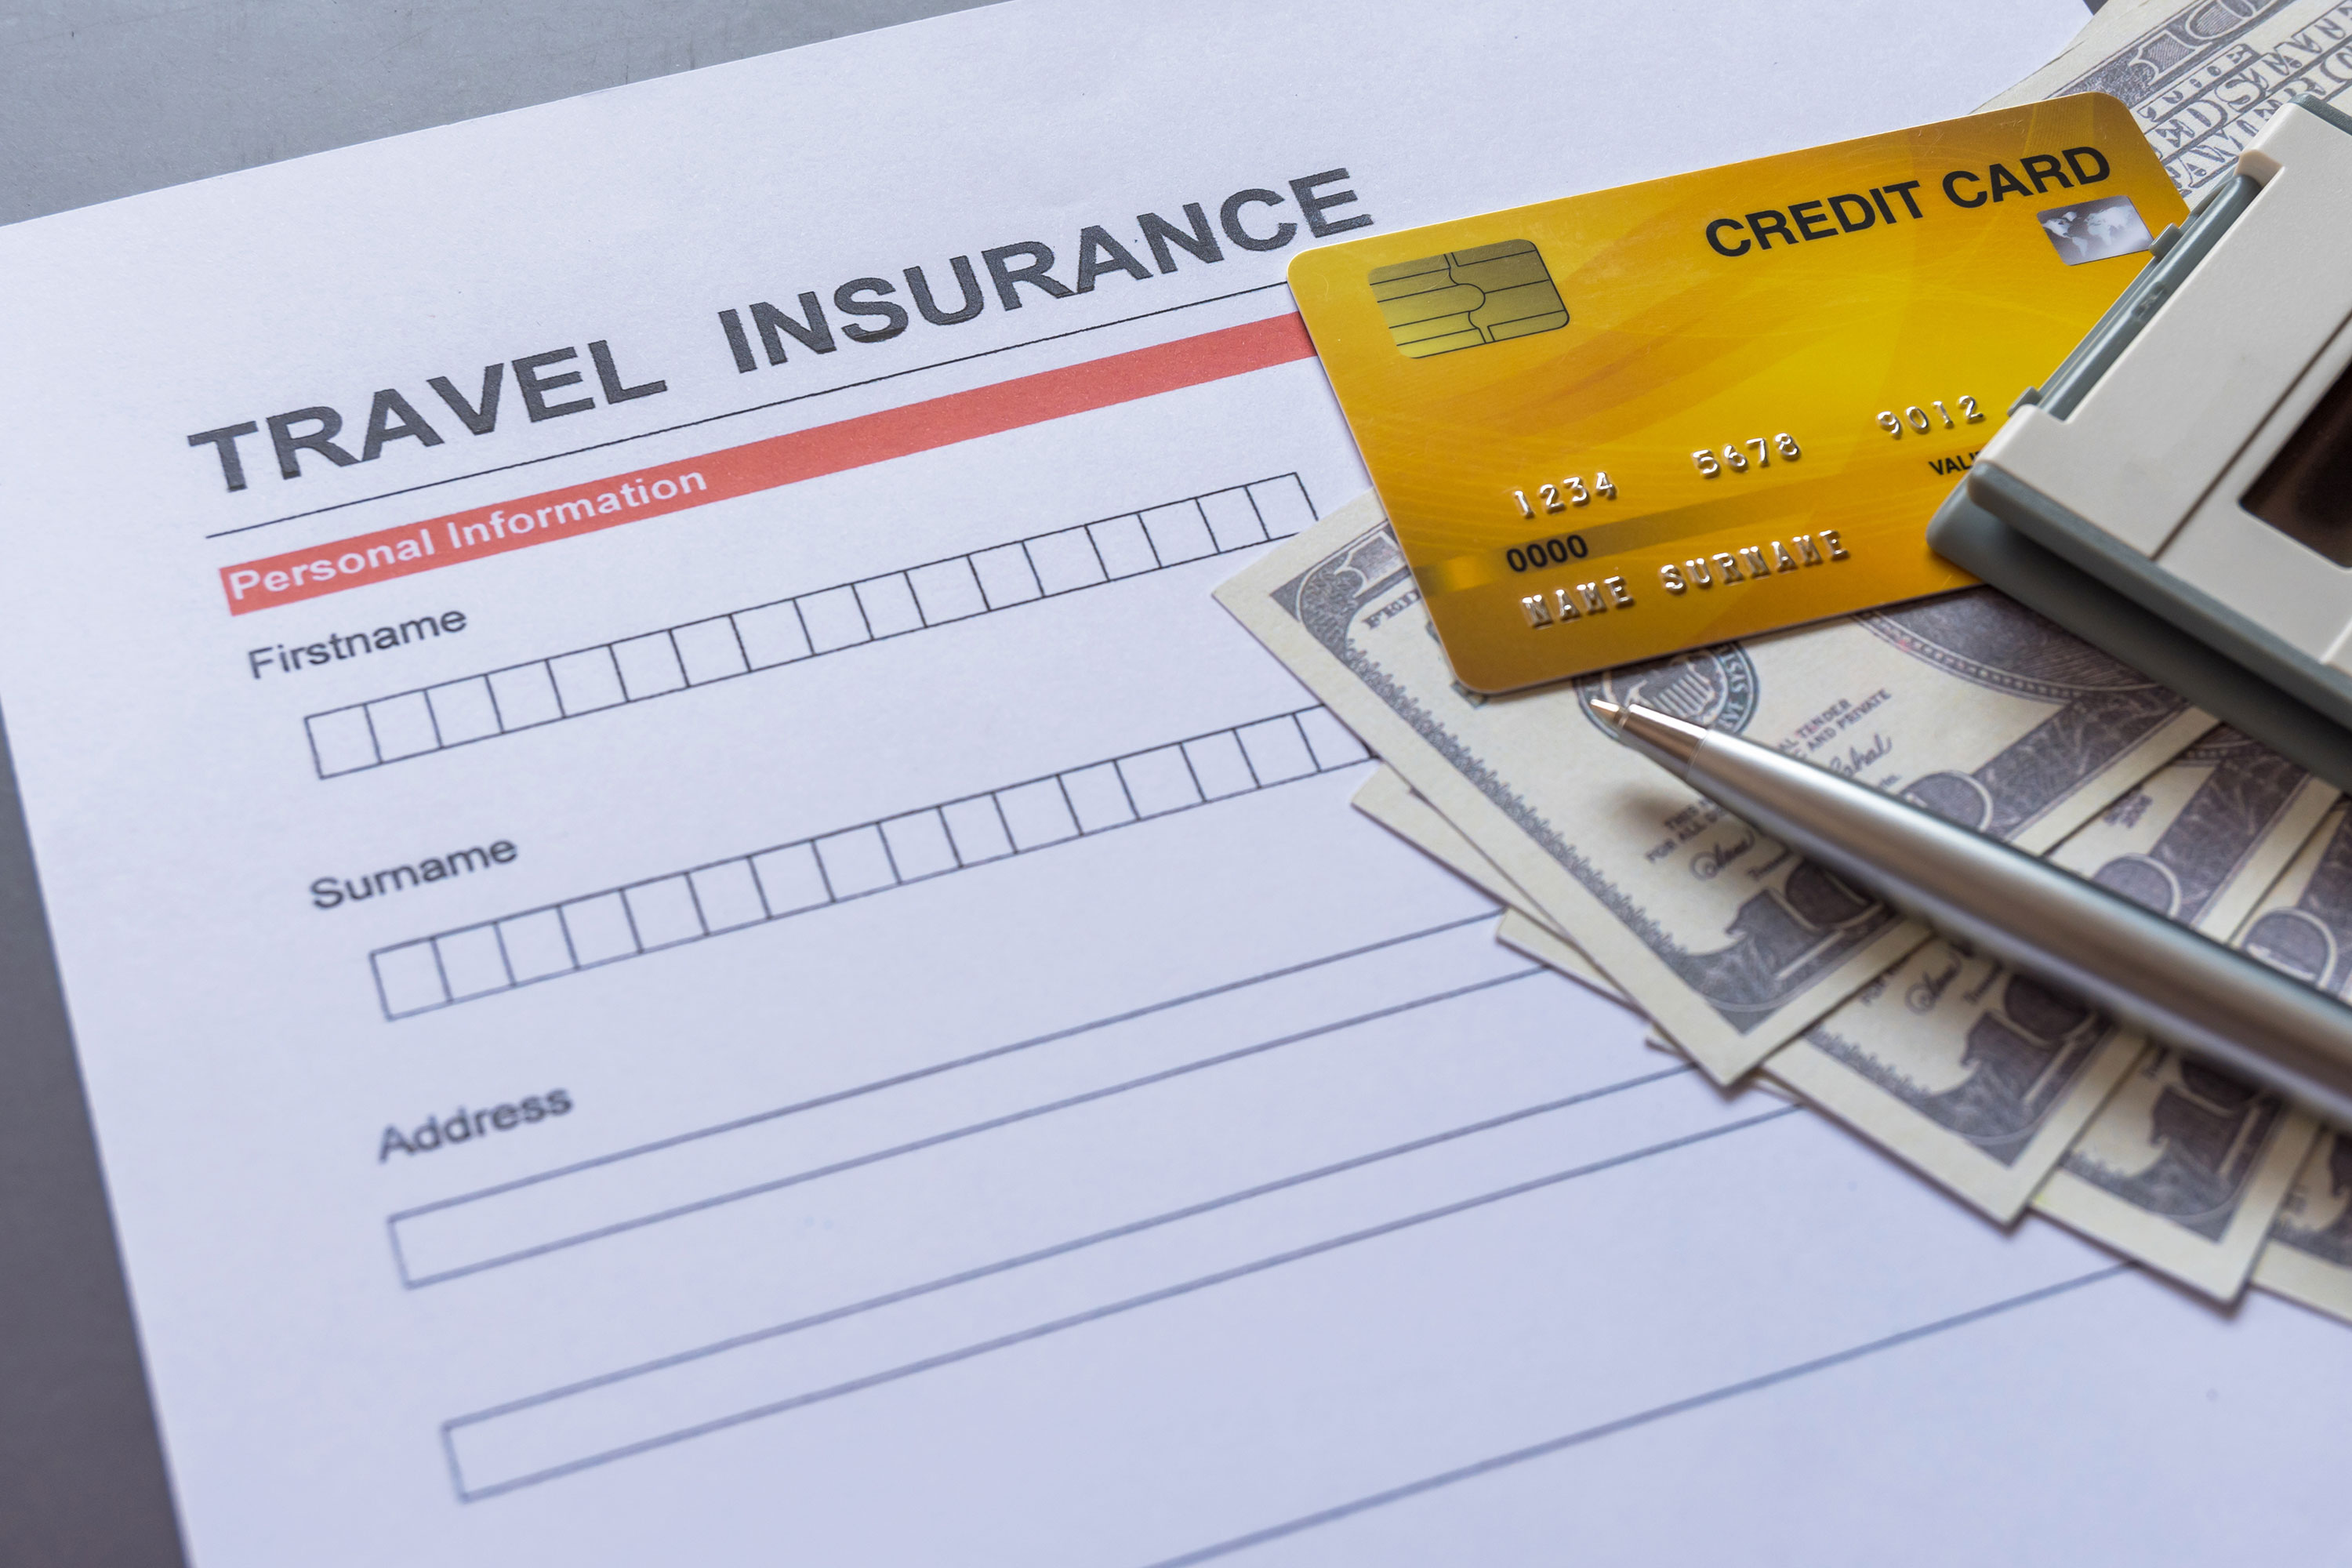 deductible-in-travel-insurance